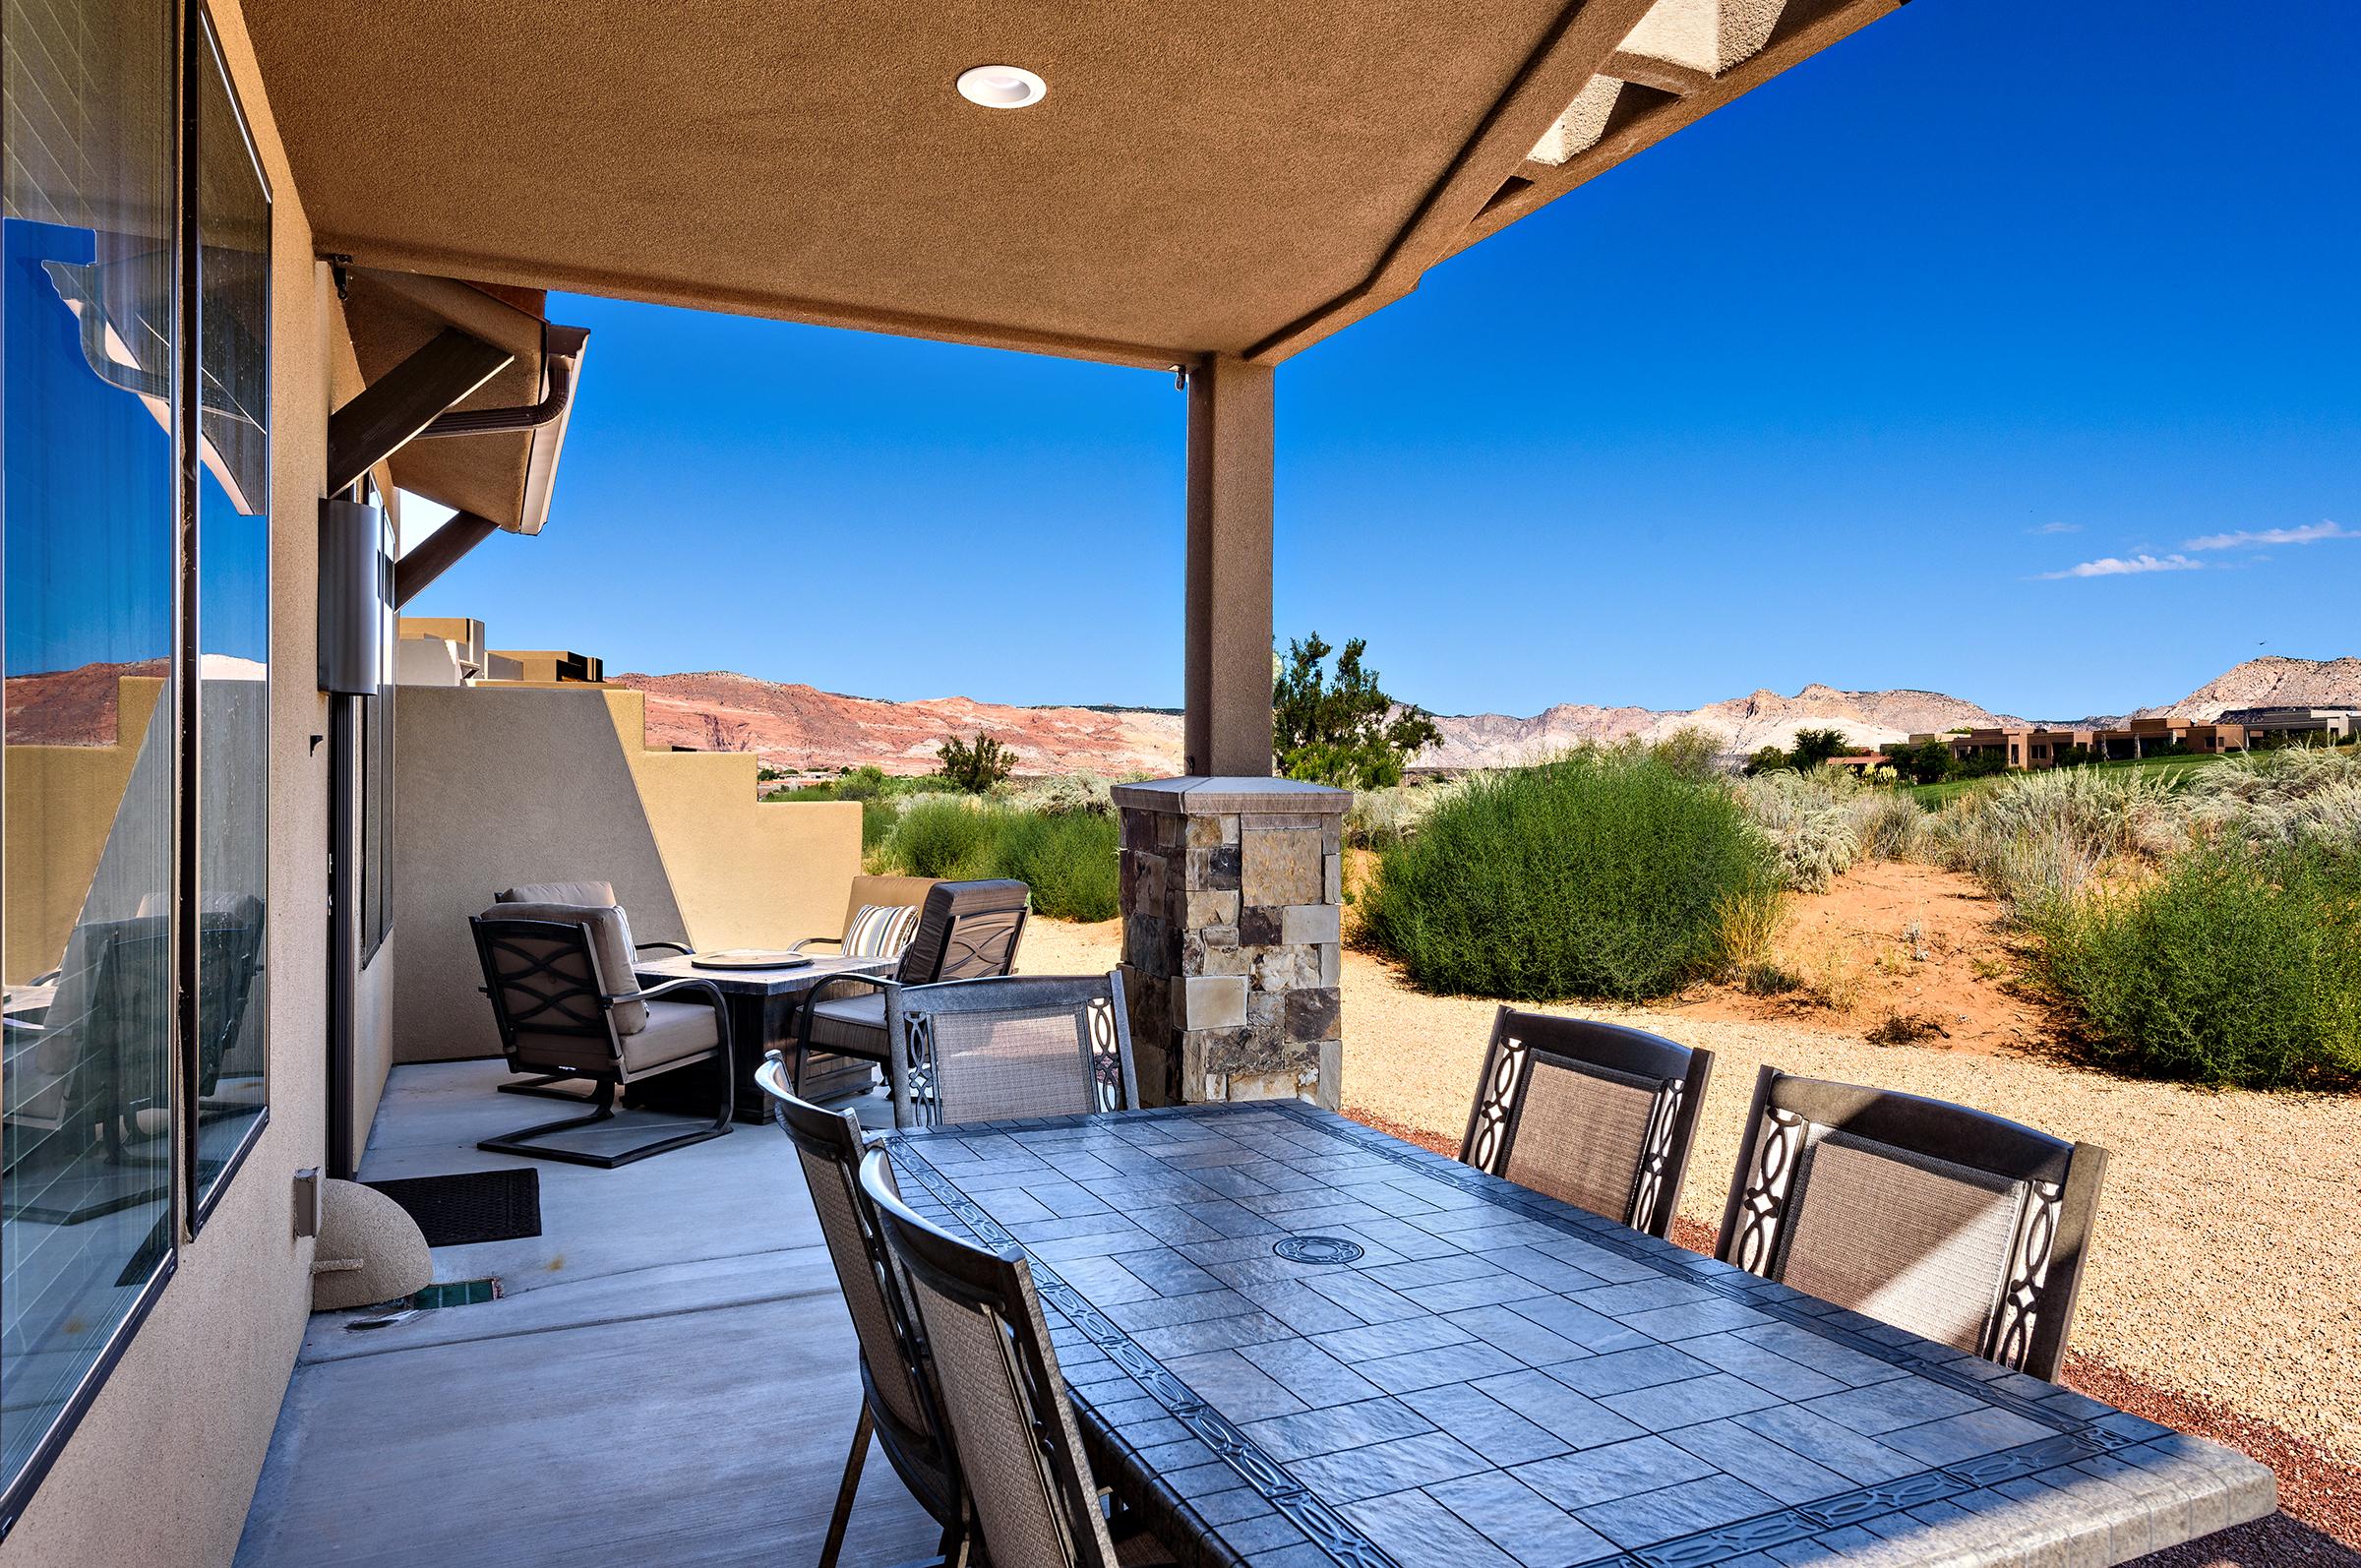 BBQ your favorite dish and eat on the patio table while enjoying the view. 